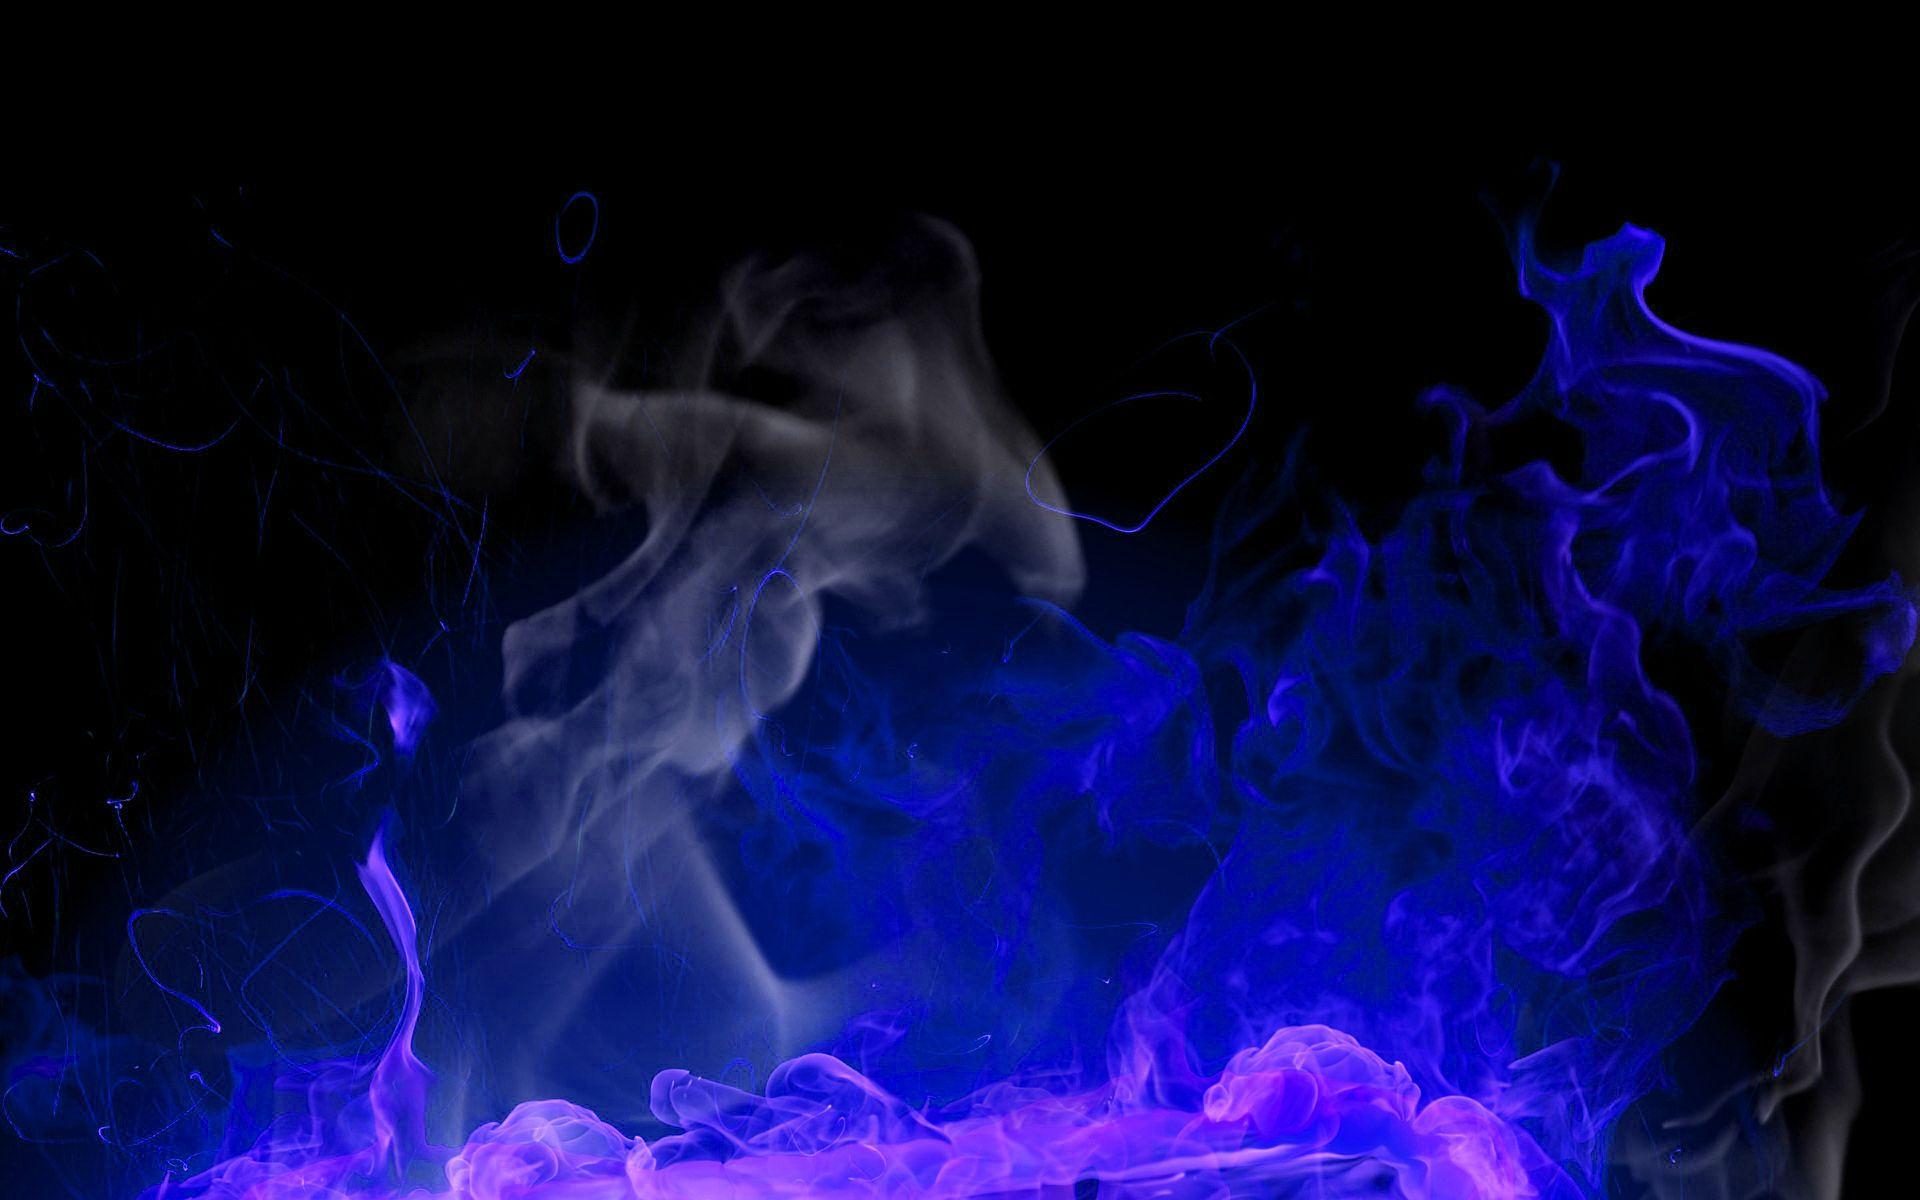 Purple Fire Pictures  Download Free Images on Unsplash